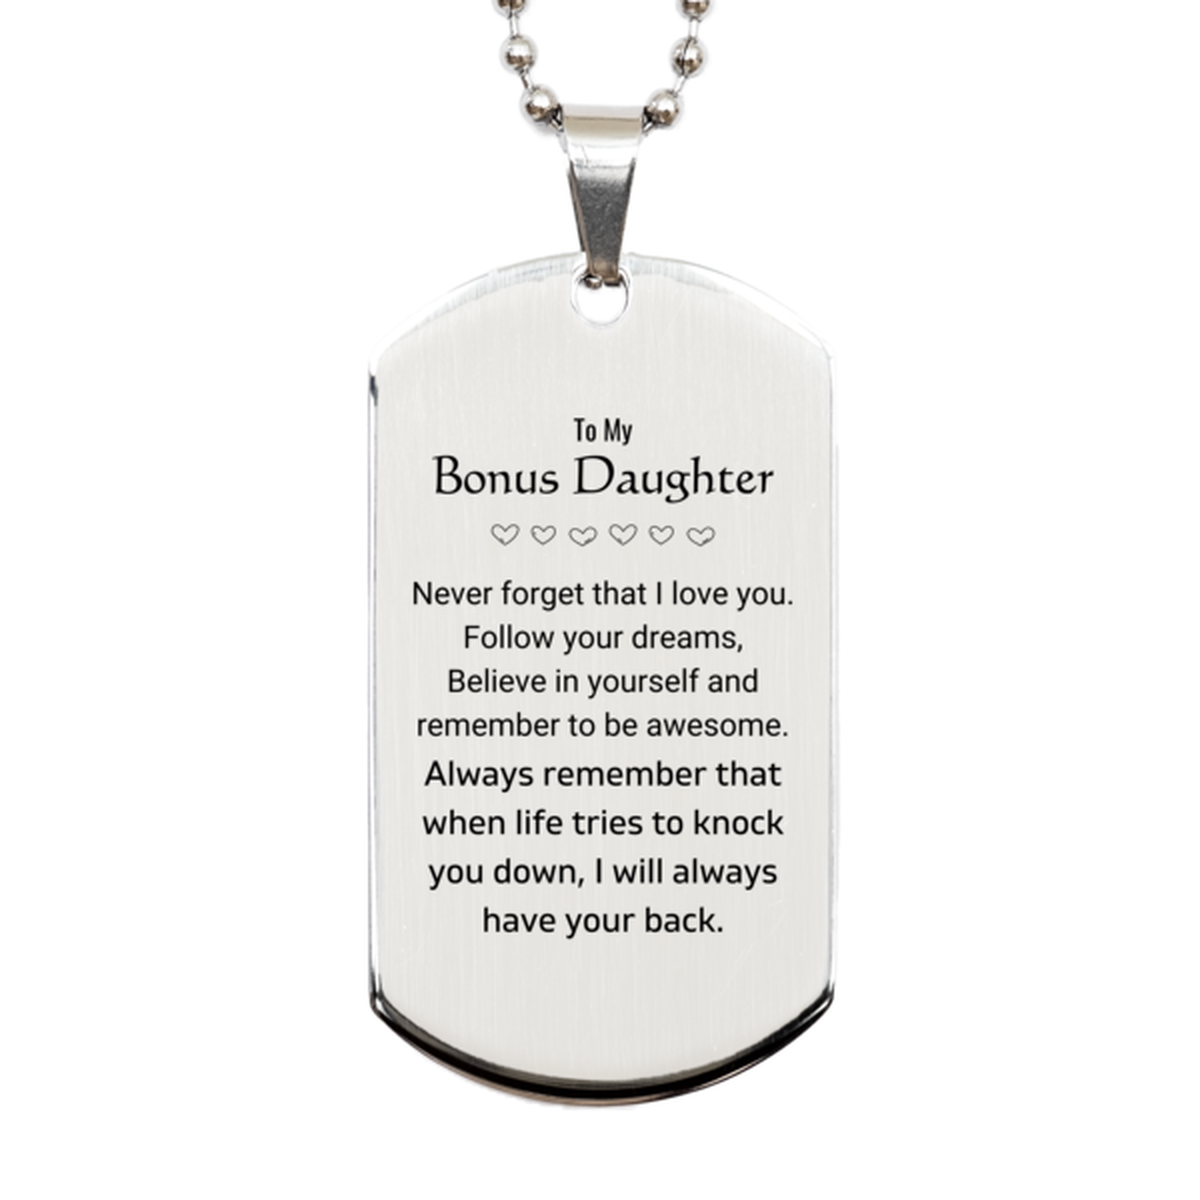 Inspirational Gifts for Bonus Daughter, Follow your dreams, Believe in yourself, Bonus Daughter Silver Dog Tag, Birthday Christmas Unique Gifts For Bonus Daughter